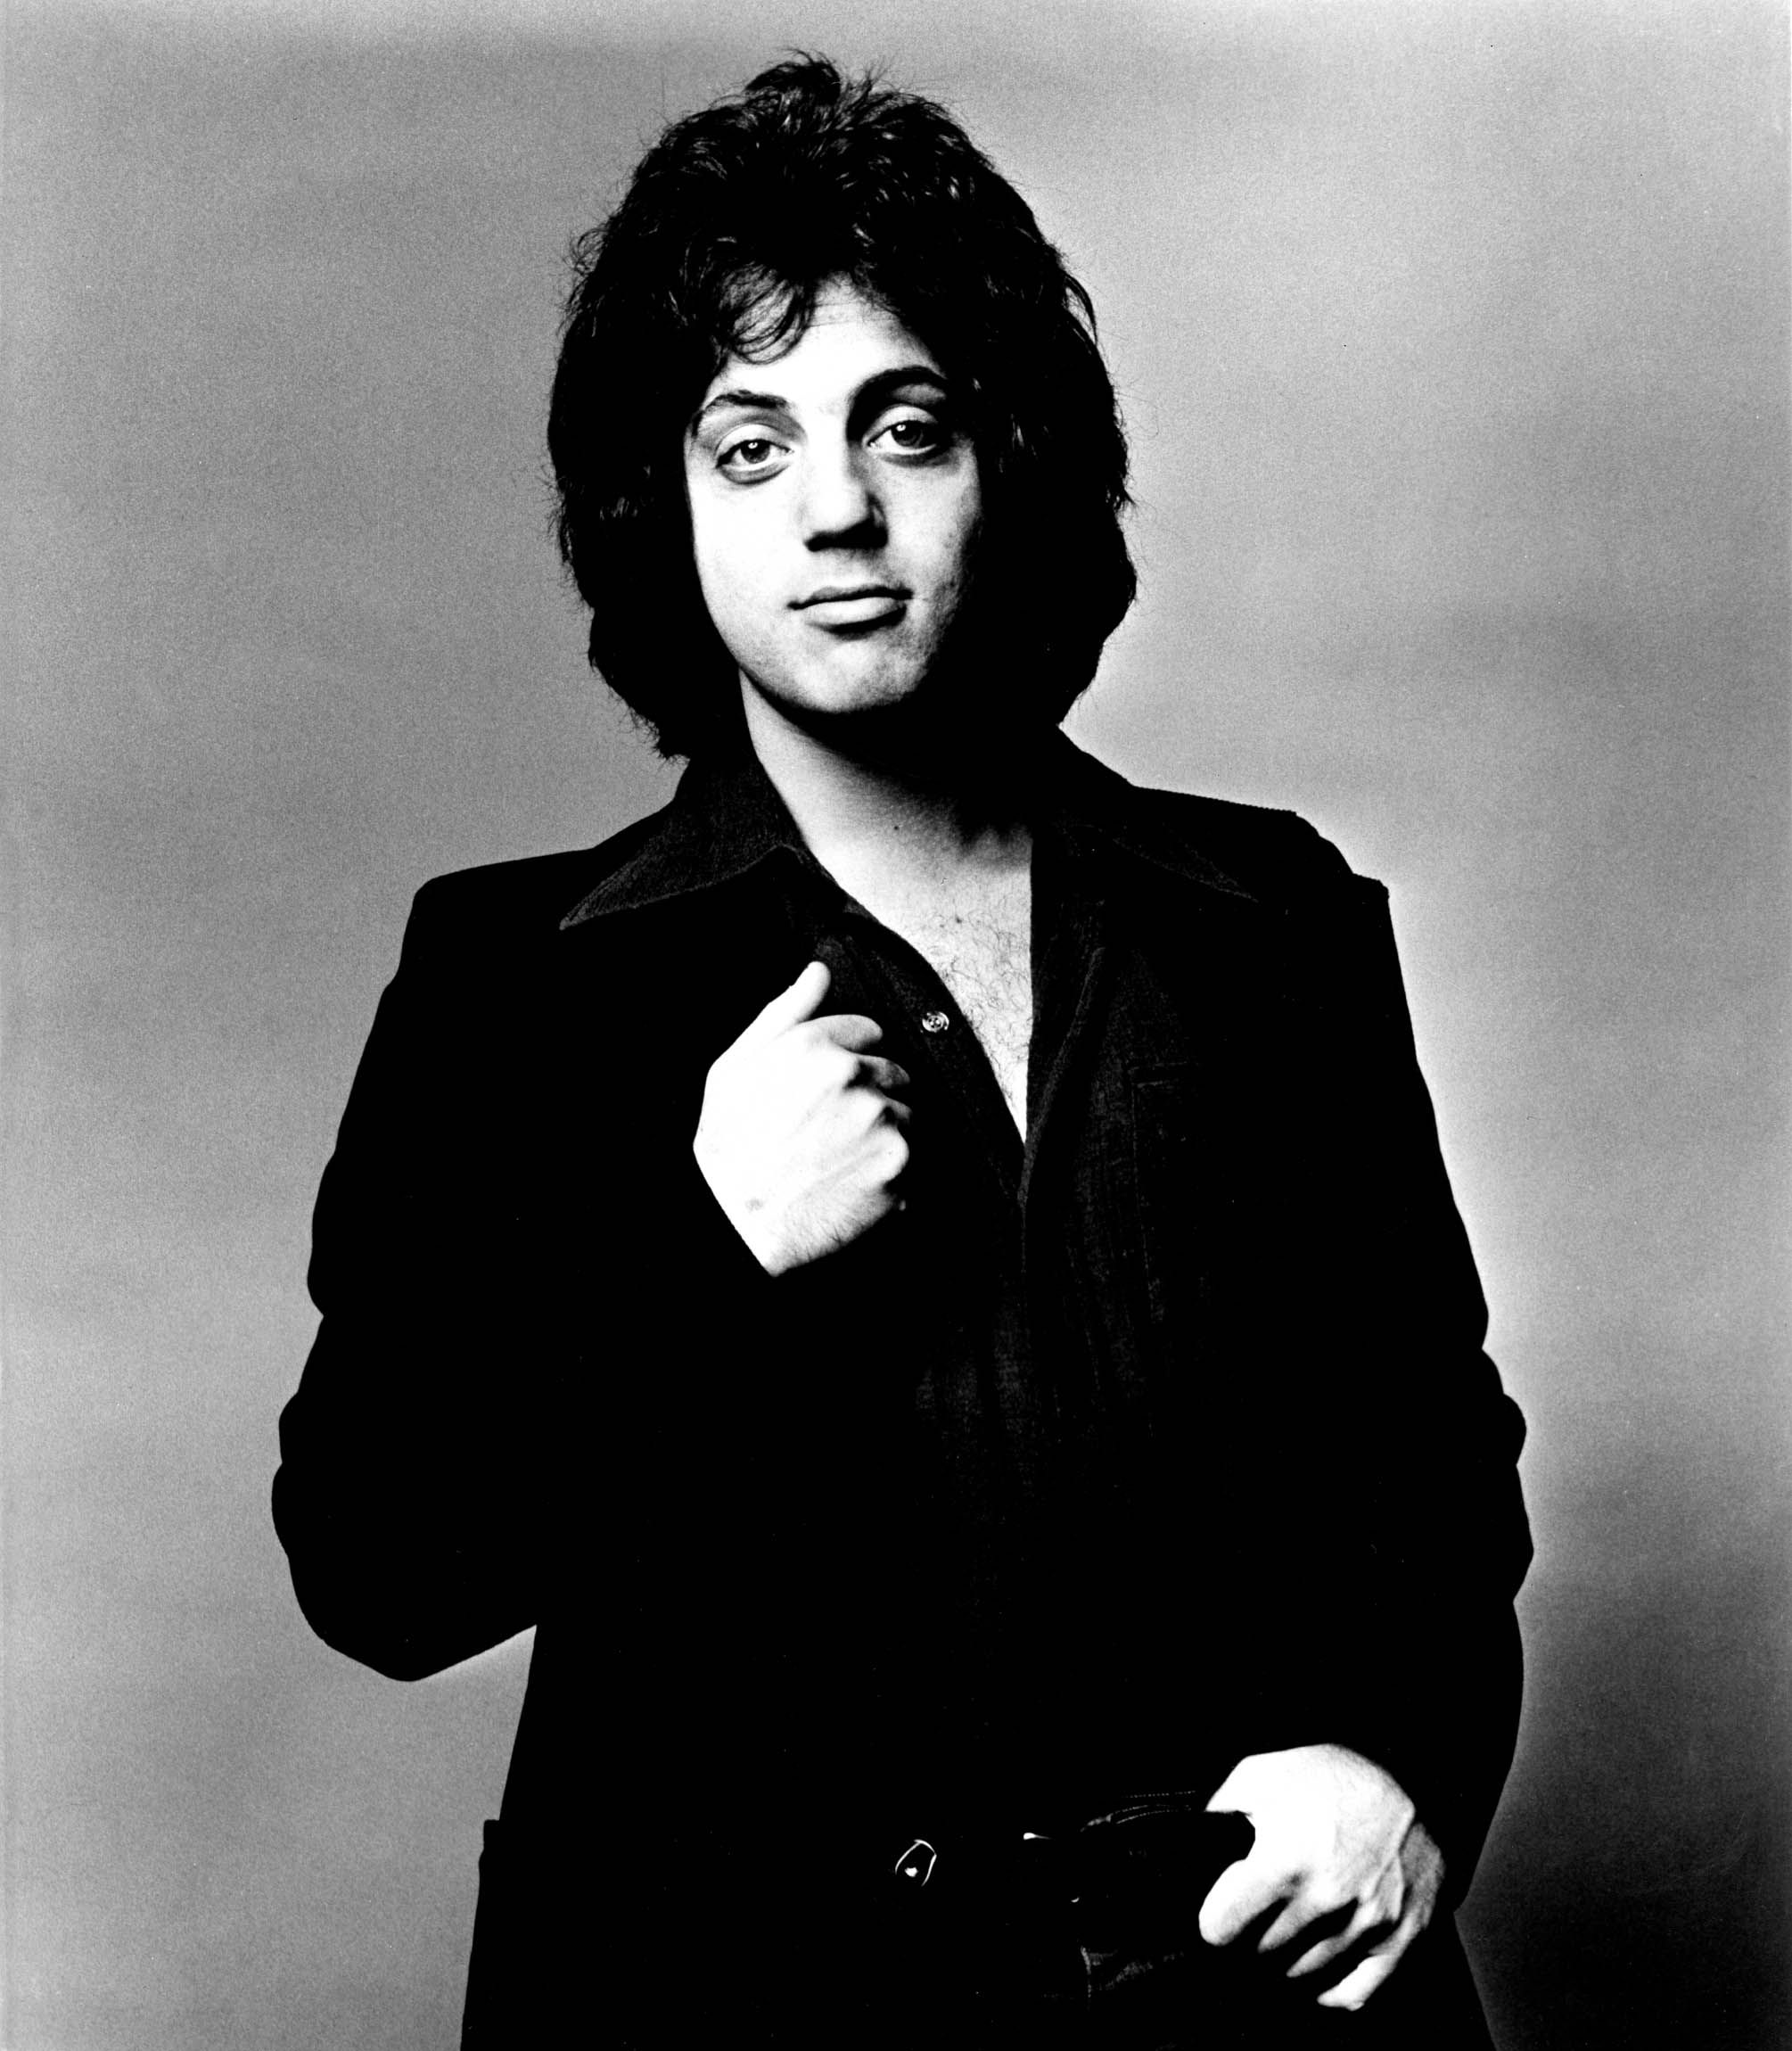 billy joel young